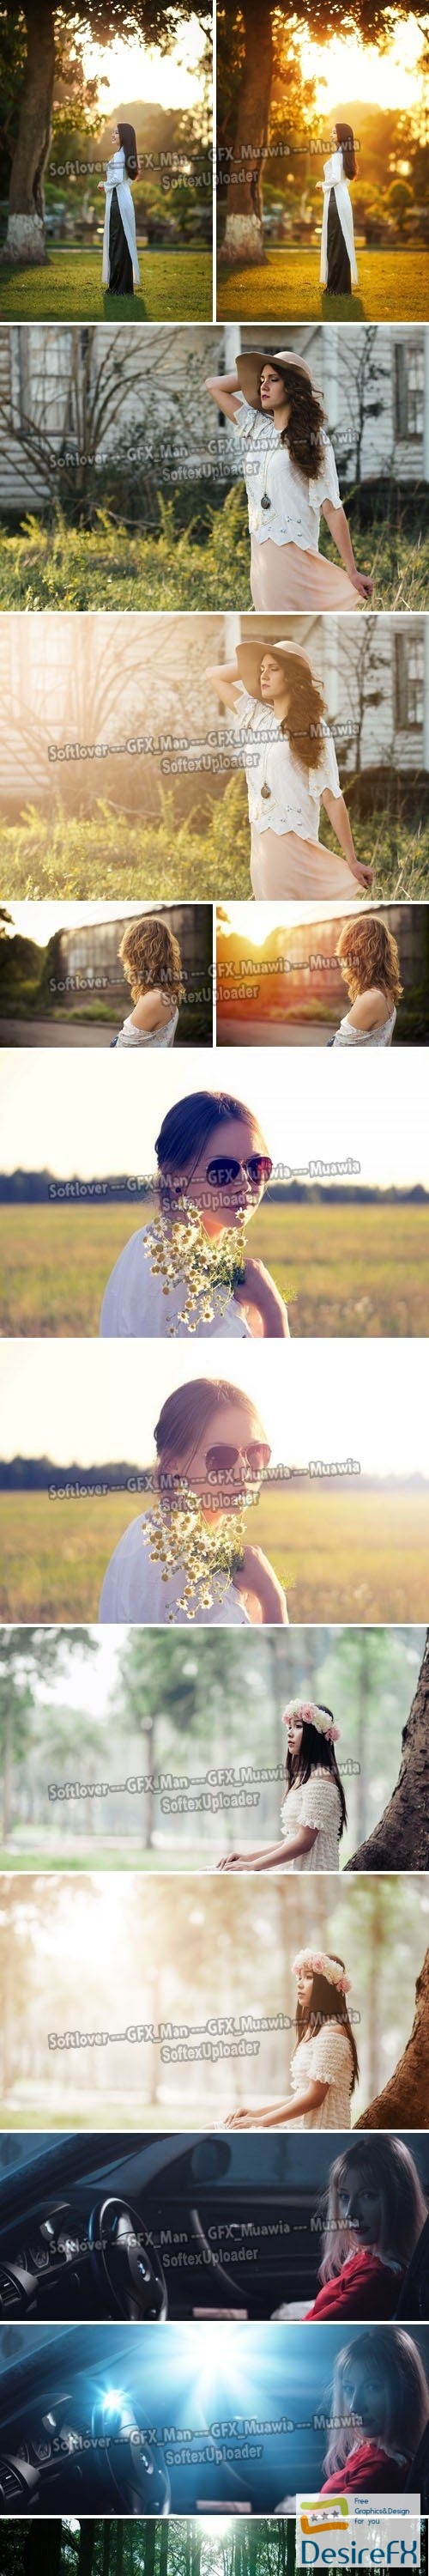 Amazing Sunlight & Lens Flare Effects for Photoshop +Tutorials